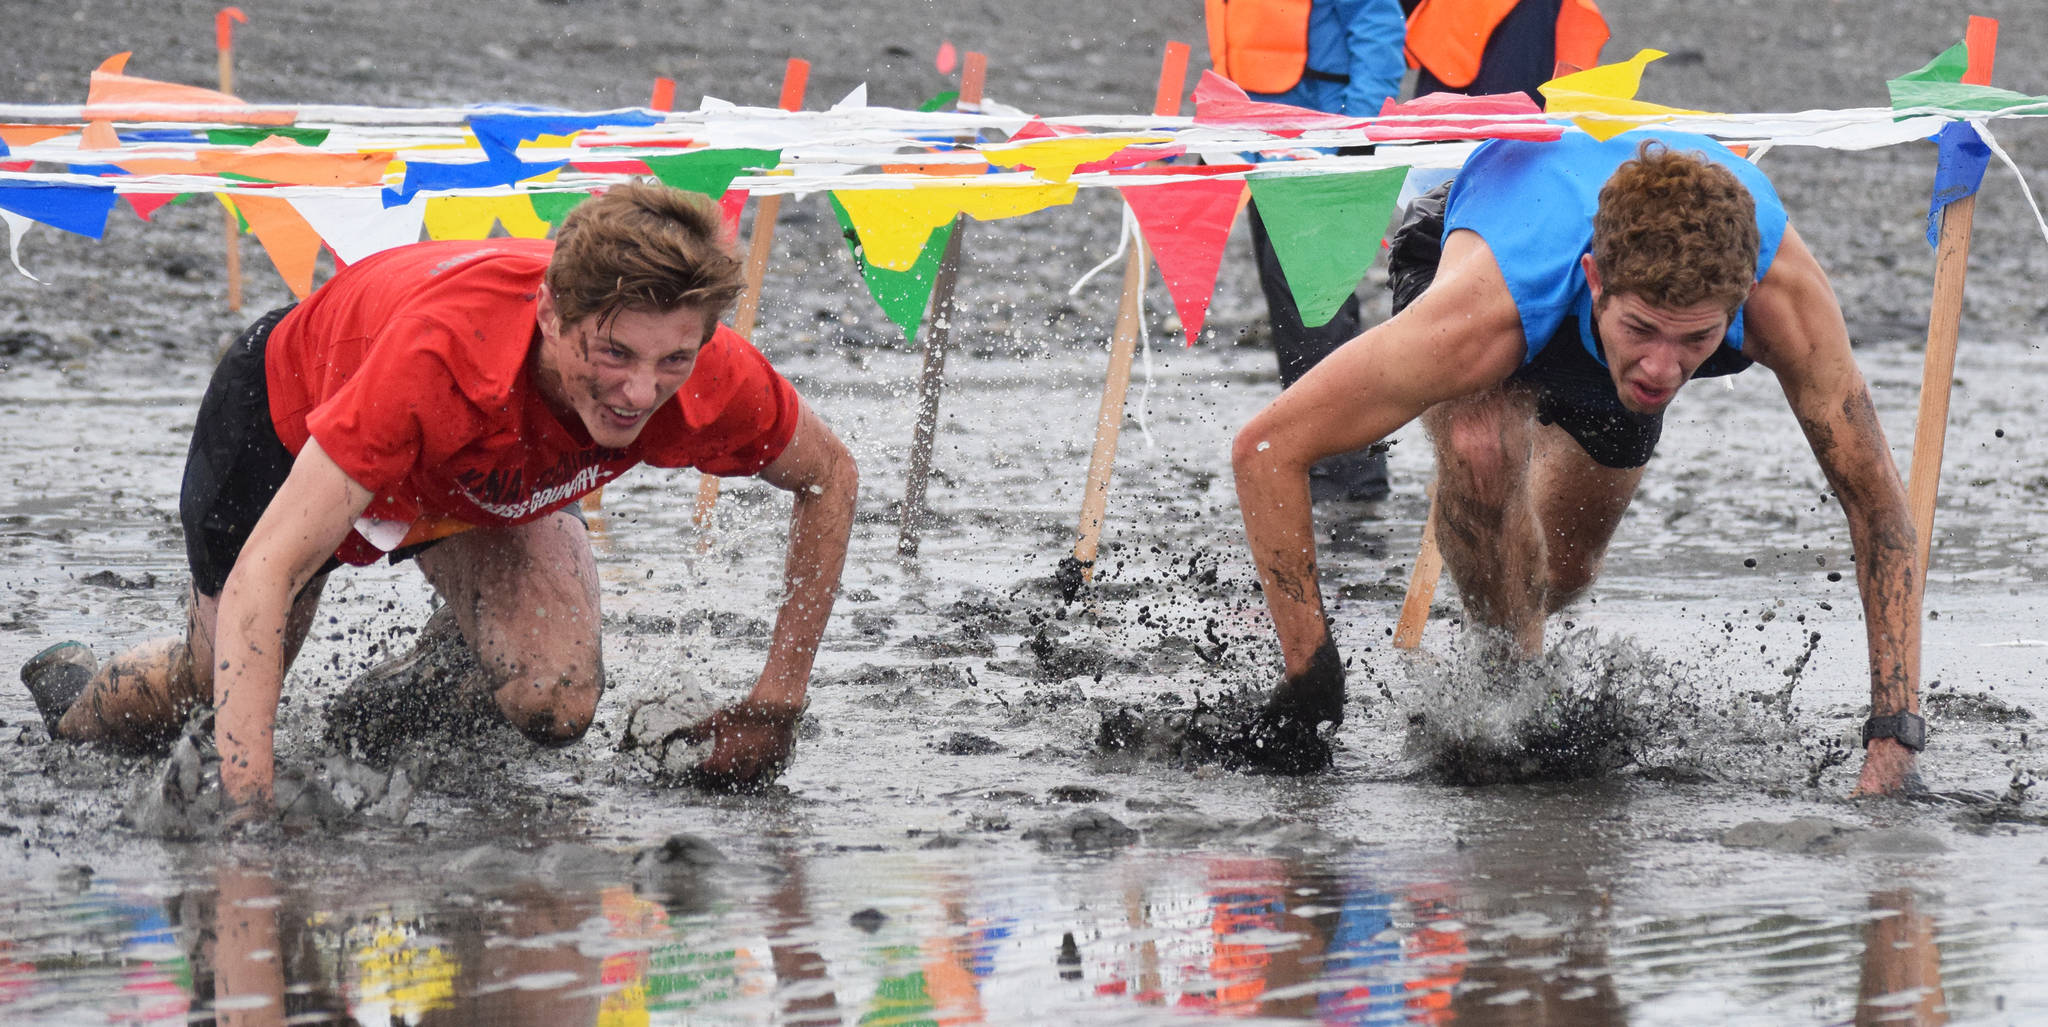 Race leaders Maison Dunham (left) and Aaron Swedberg crawl through the mud Saturday, June 15, 2019, at the Ninilchik Clam Scramble Mud and Obstacle Run in Ninilchik, Alaska. (Photo by Joey Klecka/Peninsula Clarion)